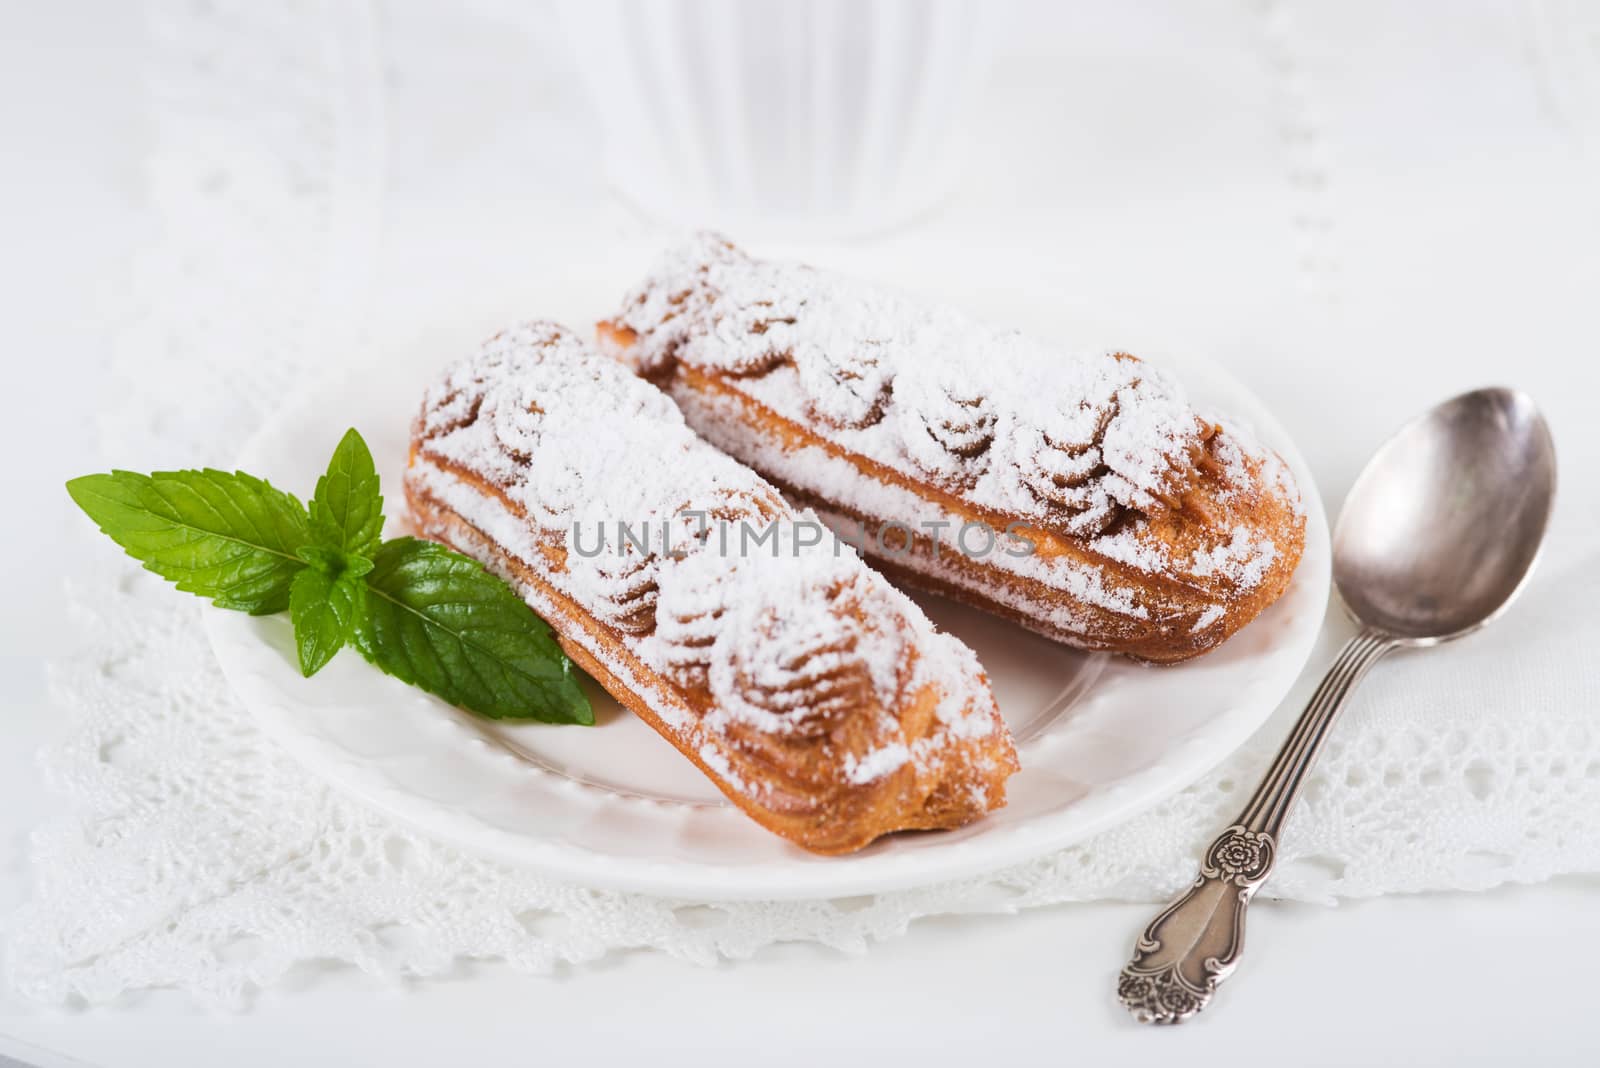 Eclairs on plate on a table by kzen